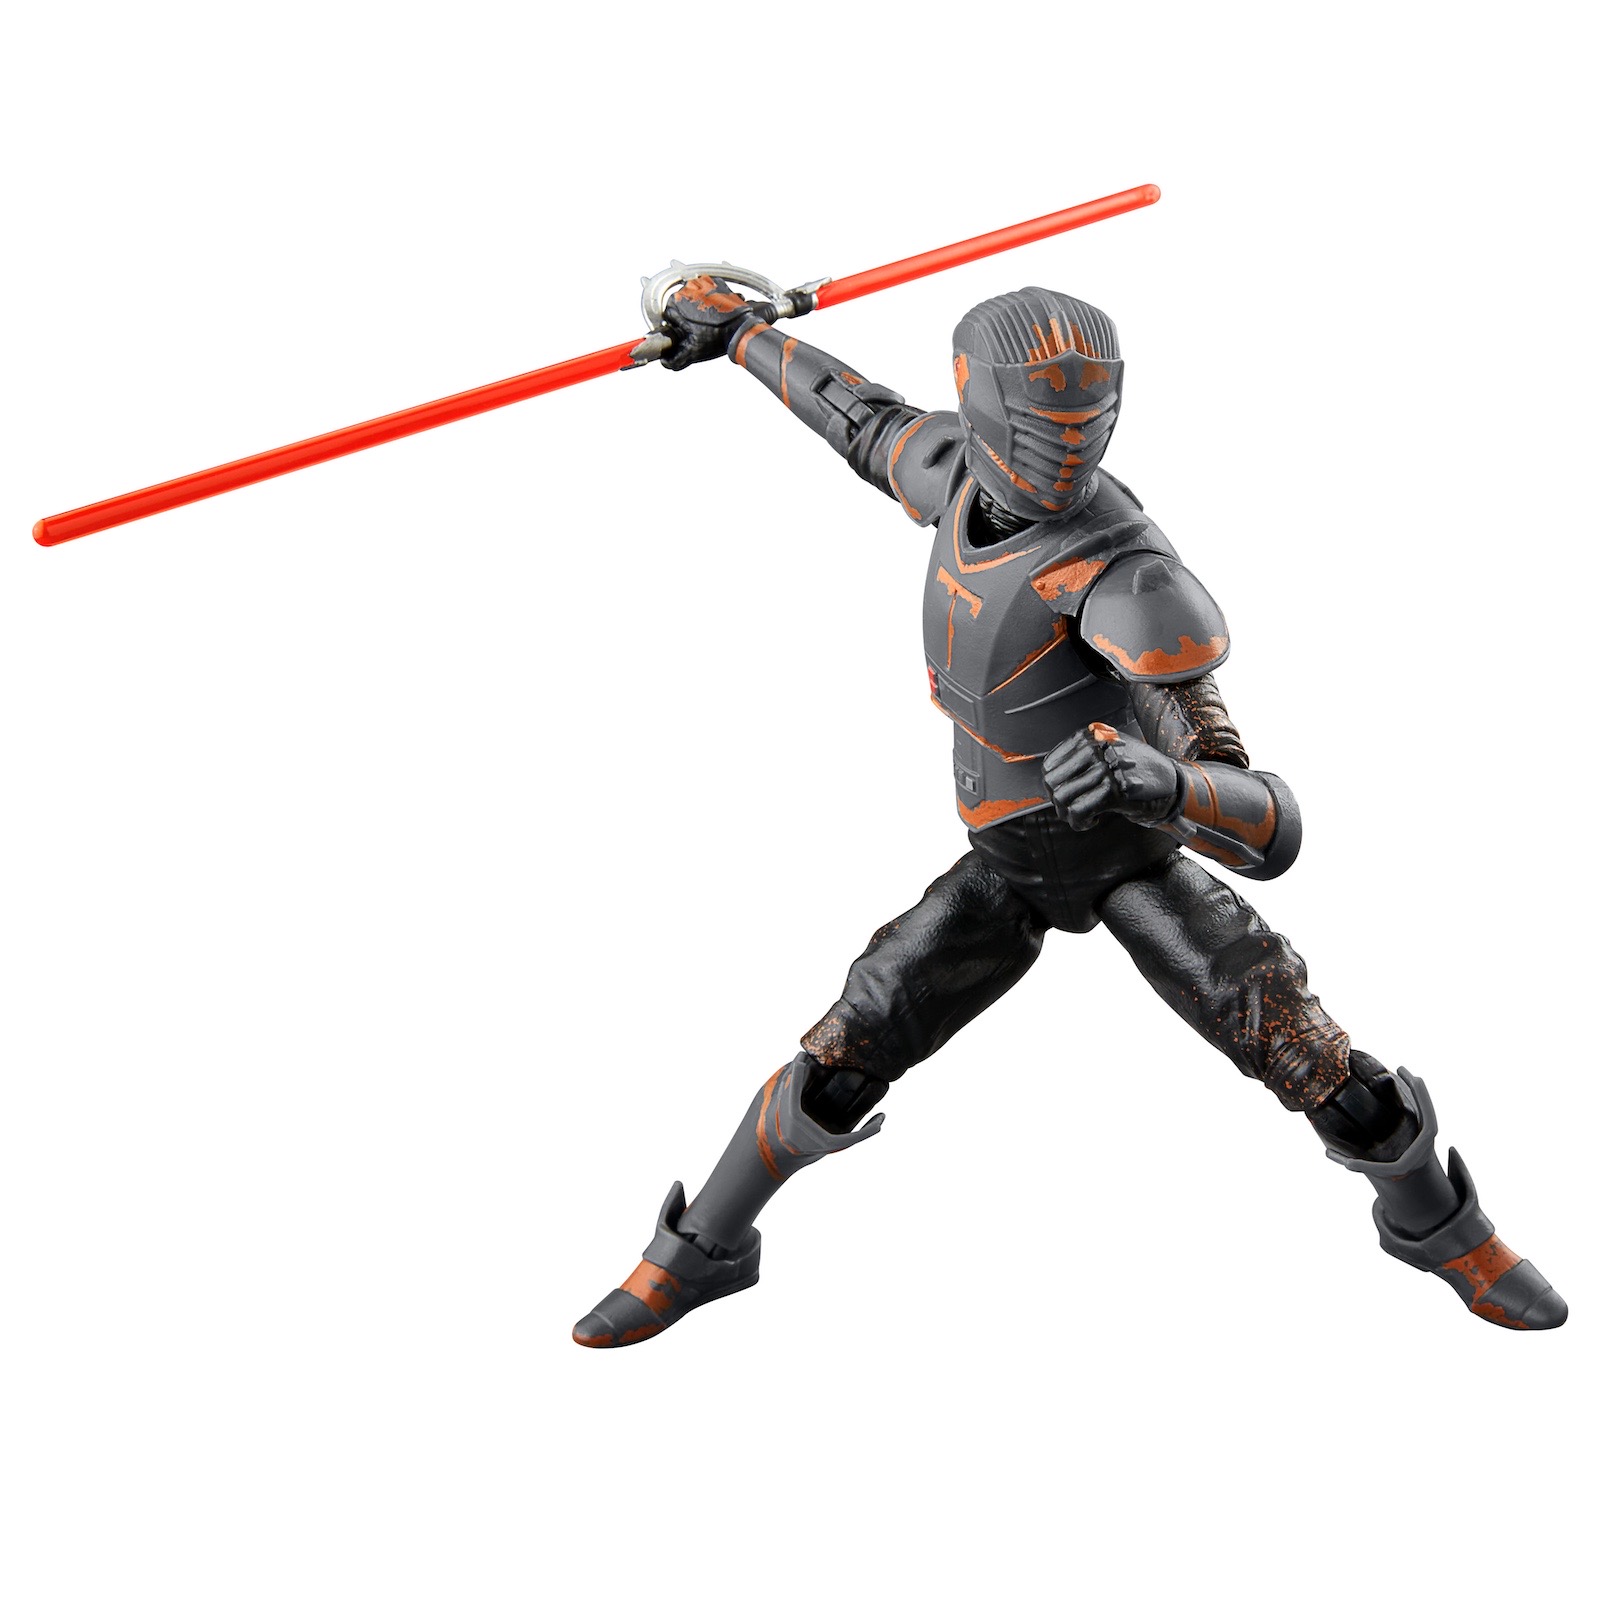 Hasbro Star Wars: New Vintage Collection and Black Series figures revealed